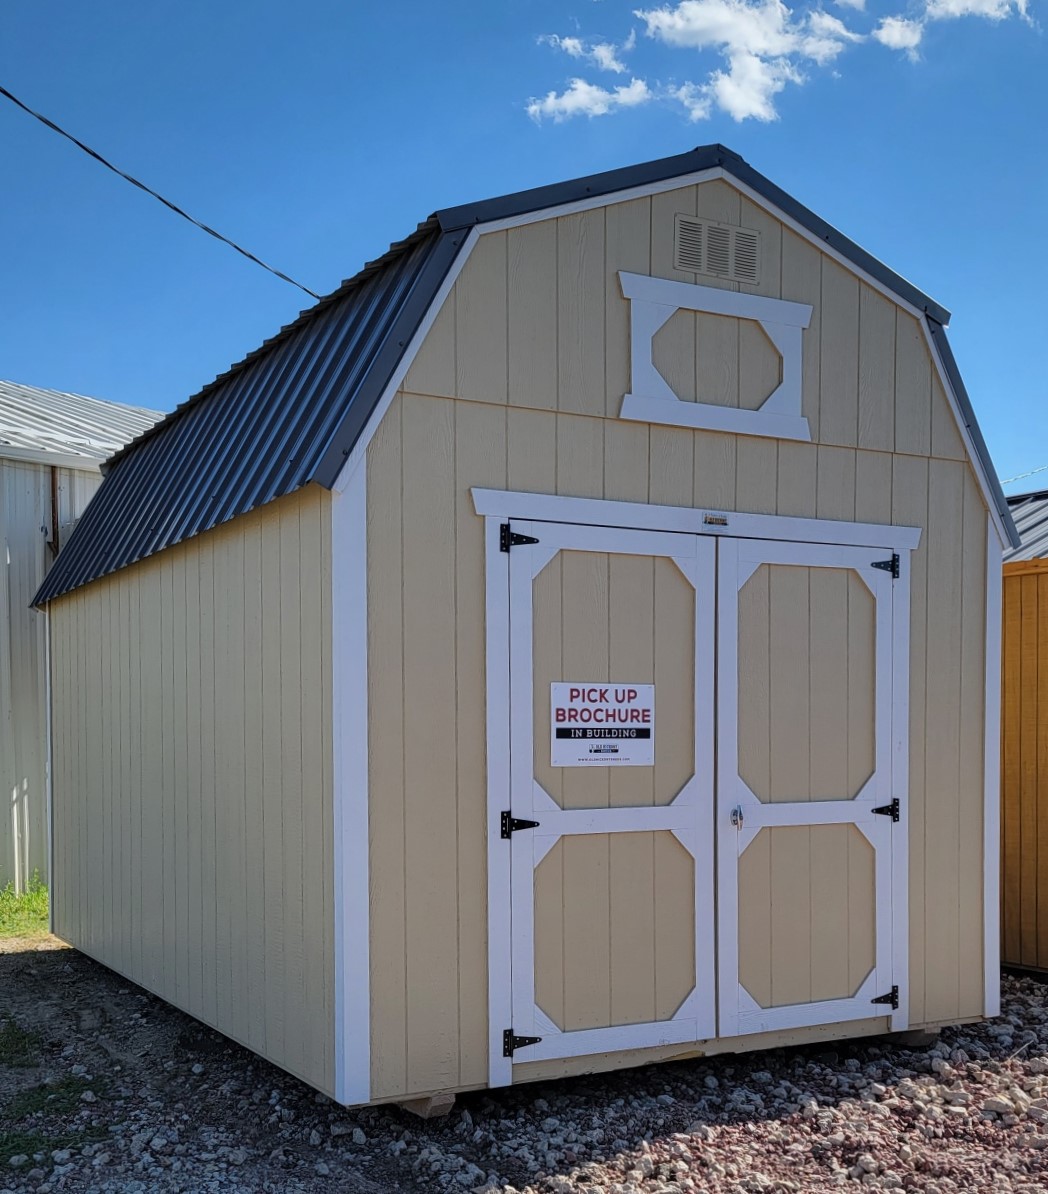 Buy Now: 10x16 Painted Lofted Barn Shed | Casper's Sheds For Sale